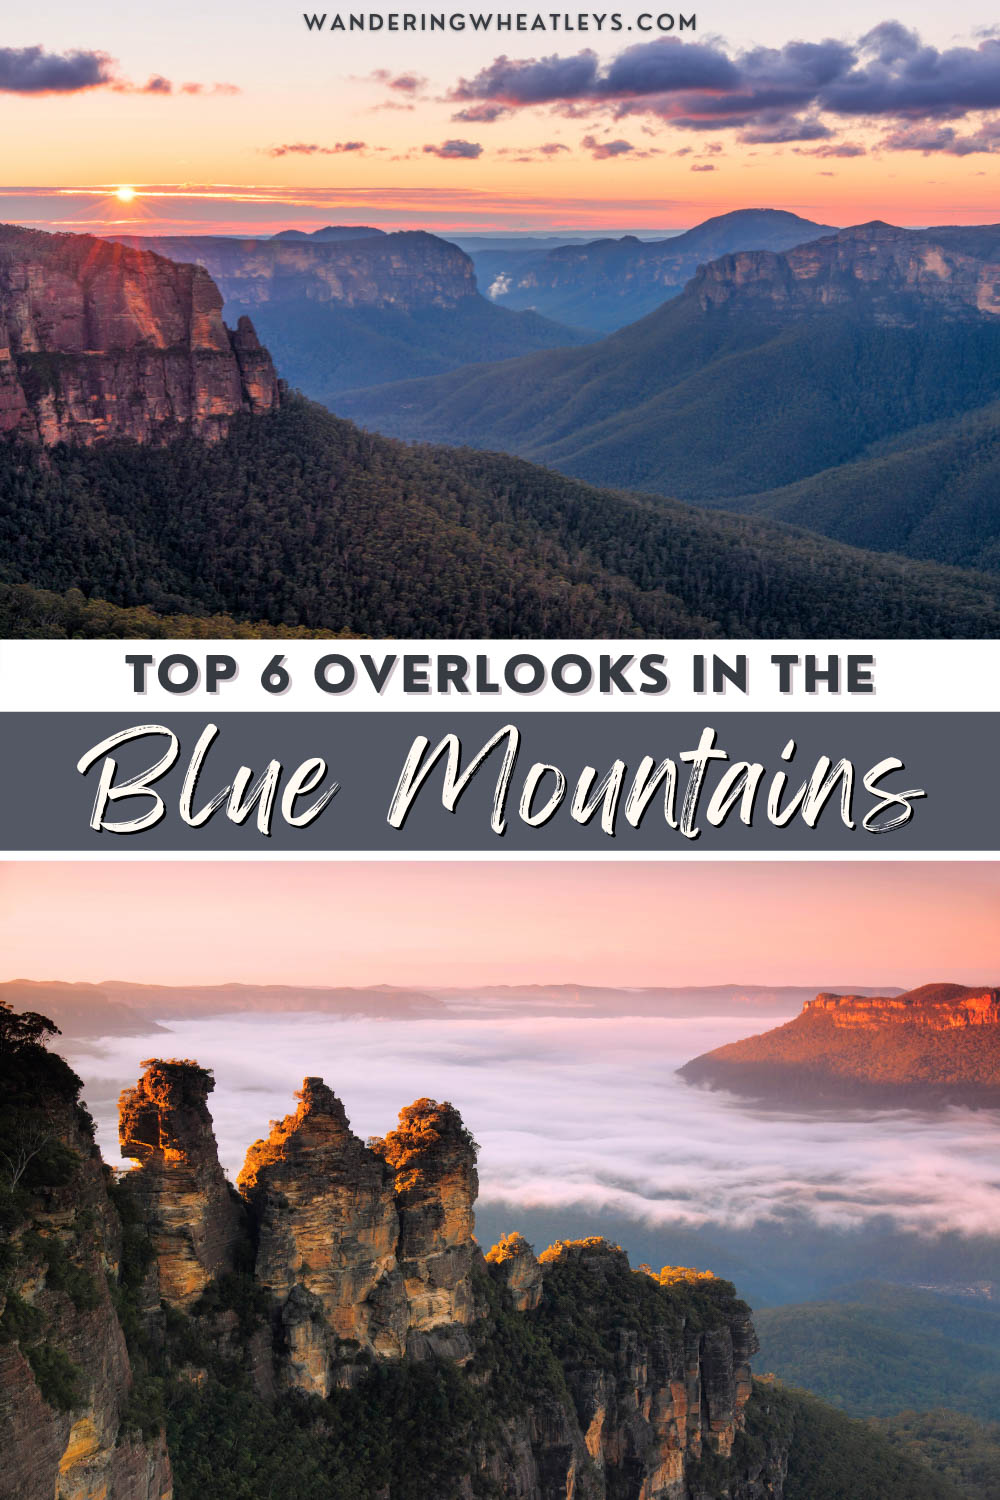 The Best Overlooks in the Blue Mountains